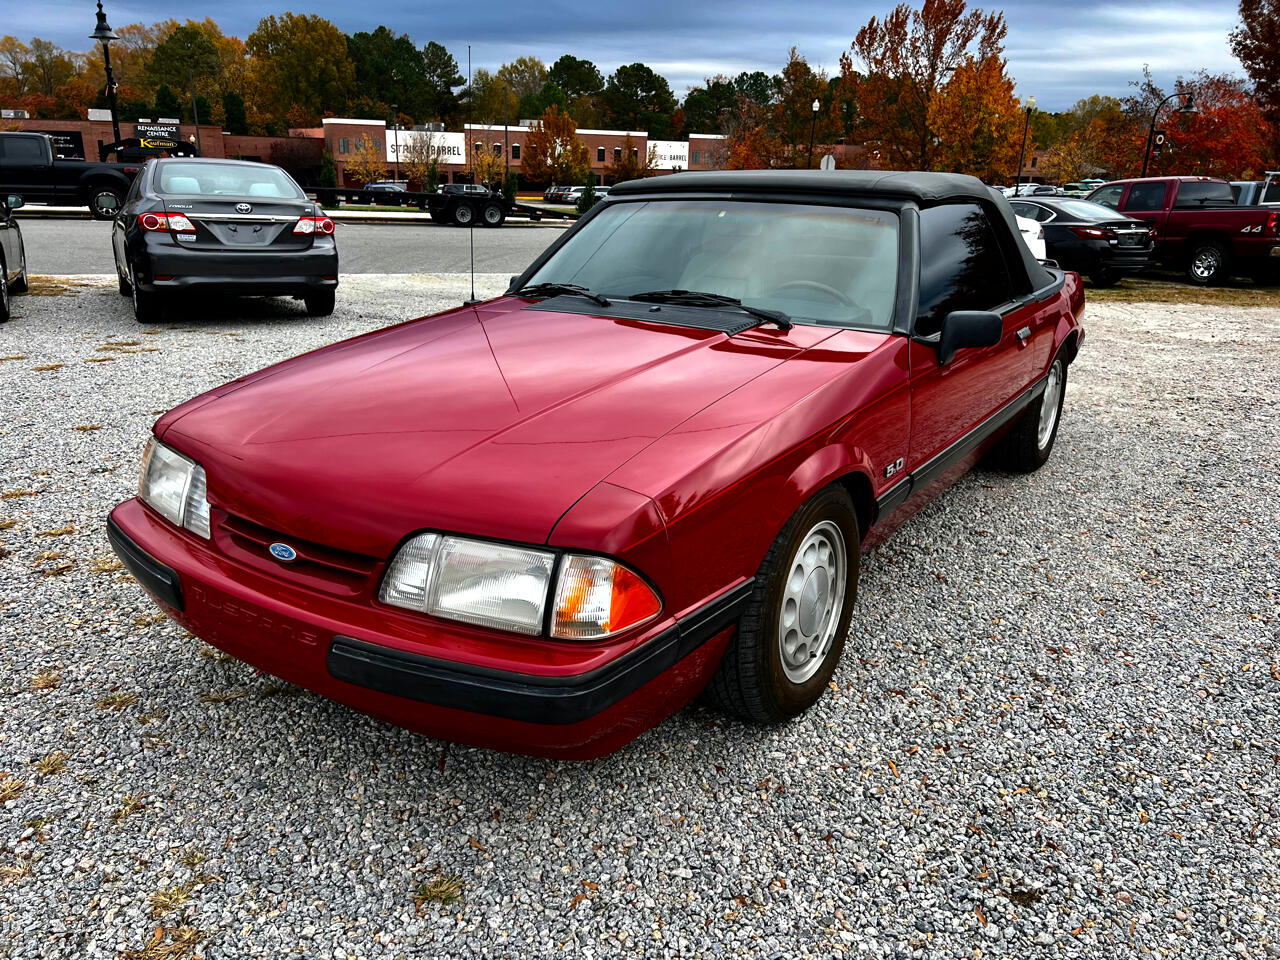 1988 Ford Mustang Wake Forest NC